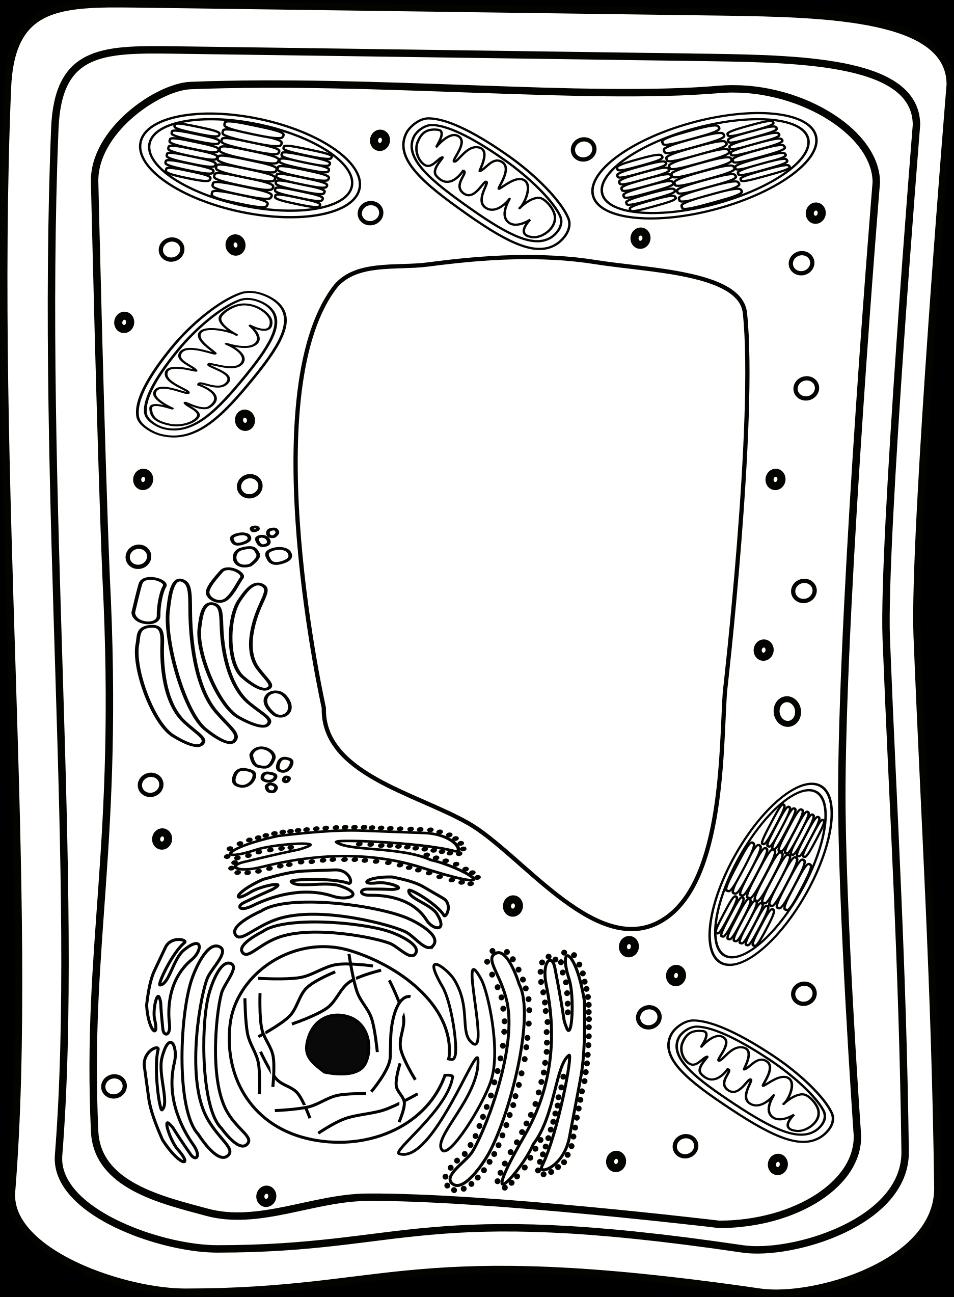 Parts of a Plant Cell Answer Key Name: Date: Directions: Label each part of the plant cell shown.